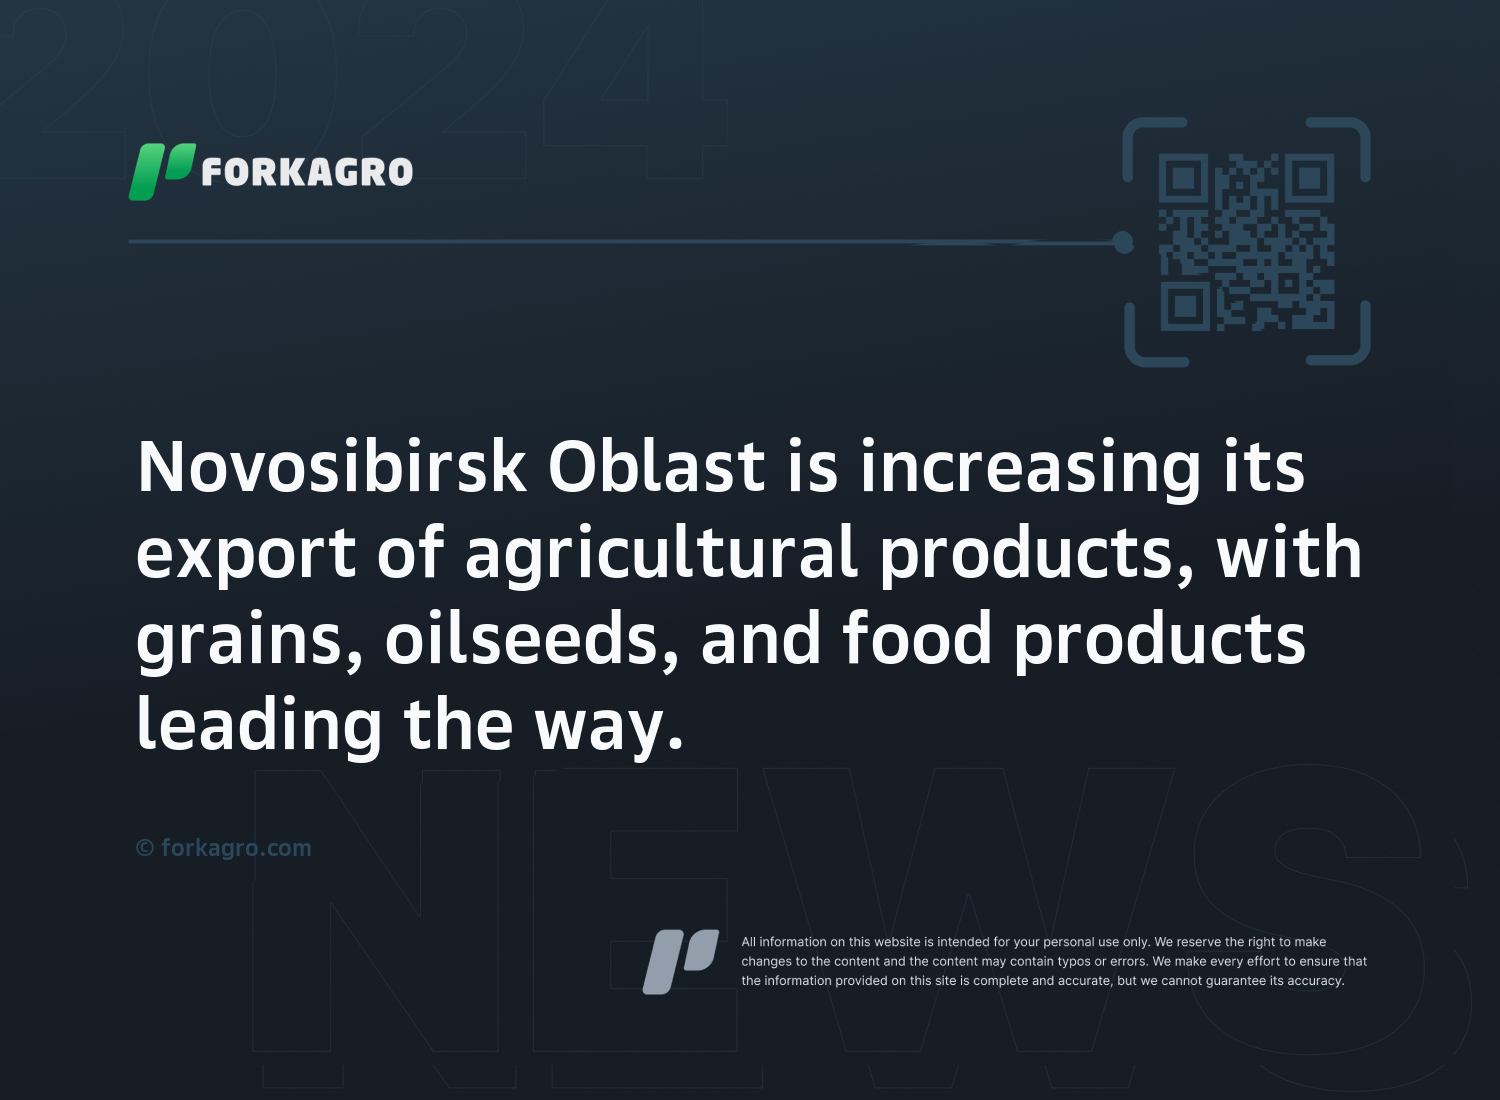 Novosibirsk Oblast is increasing its export of agricultural products, with grains, oilseeds, and food products leading the way.